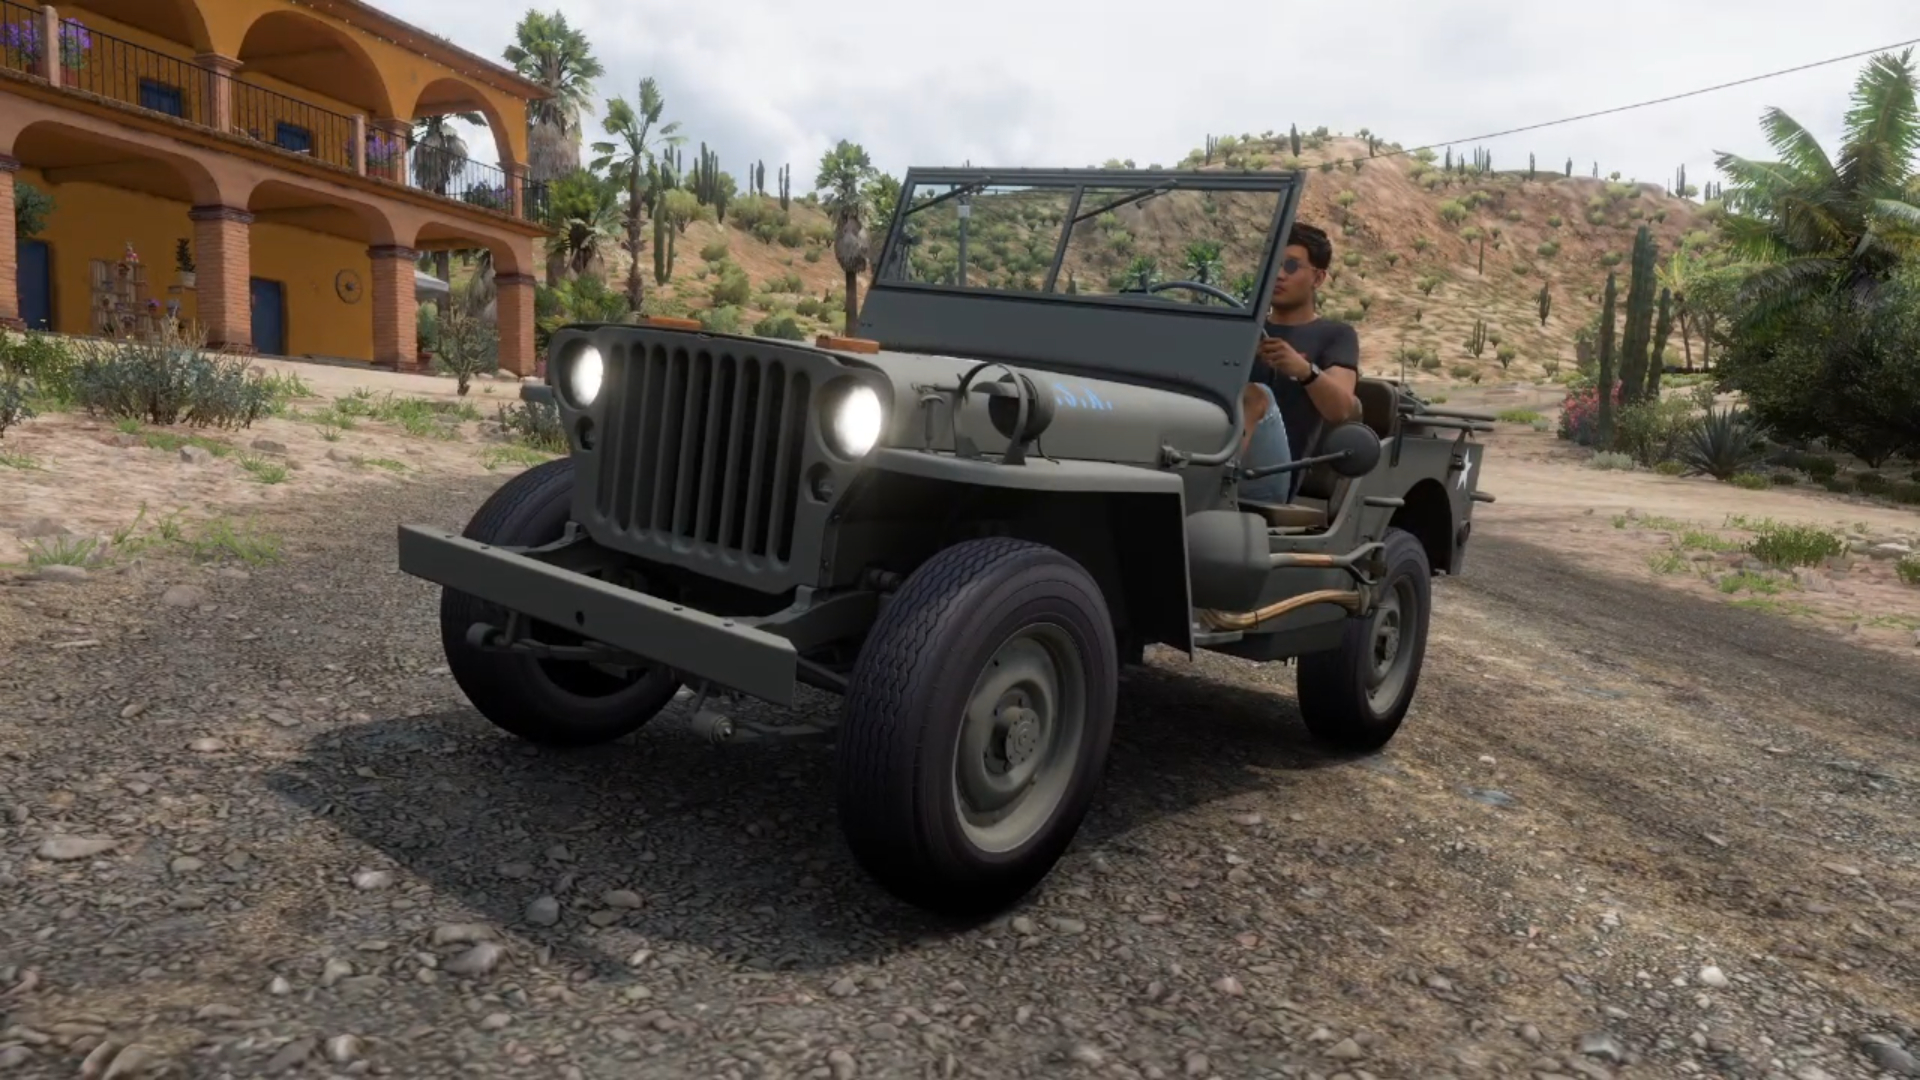 Forza Horizon 5 Players Are Buying Up One Crappy Jeep By The Hundreds To Farm Money thumbnail